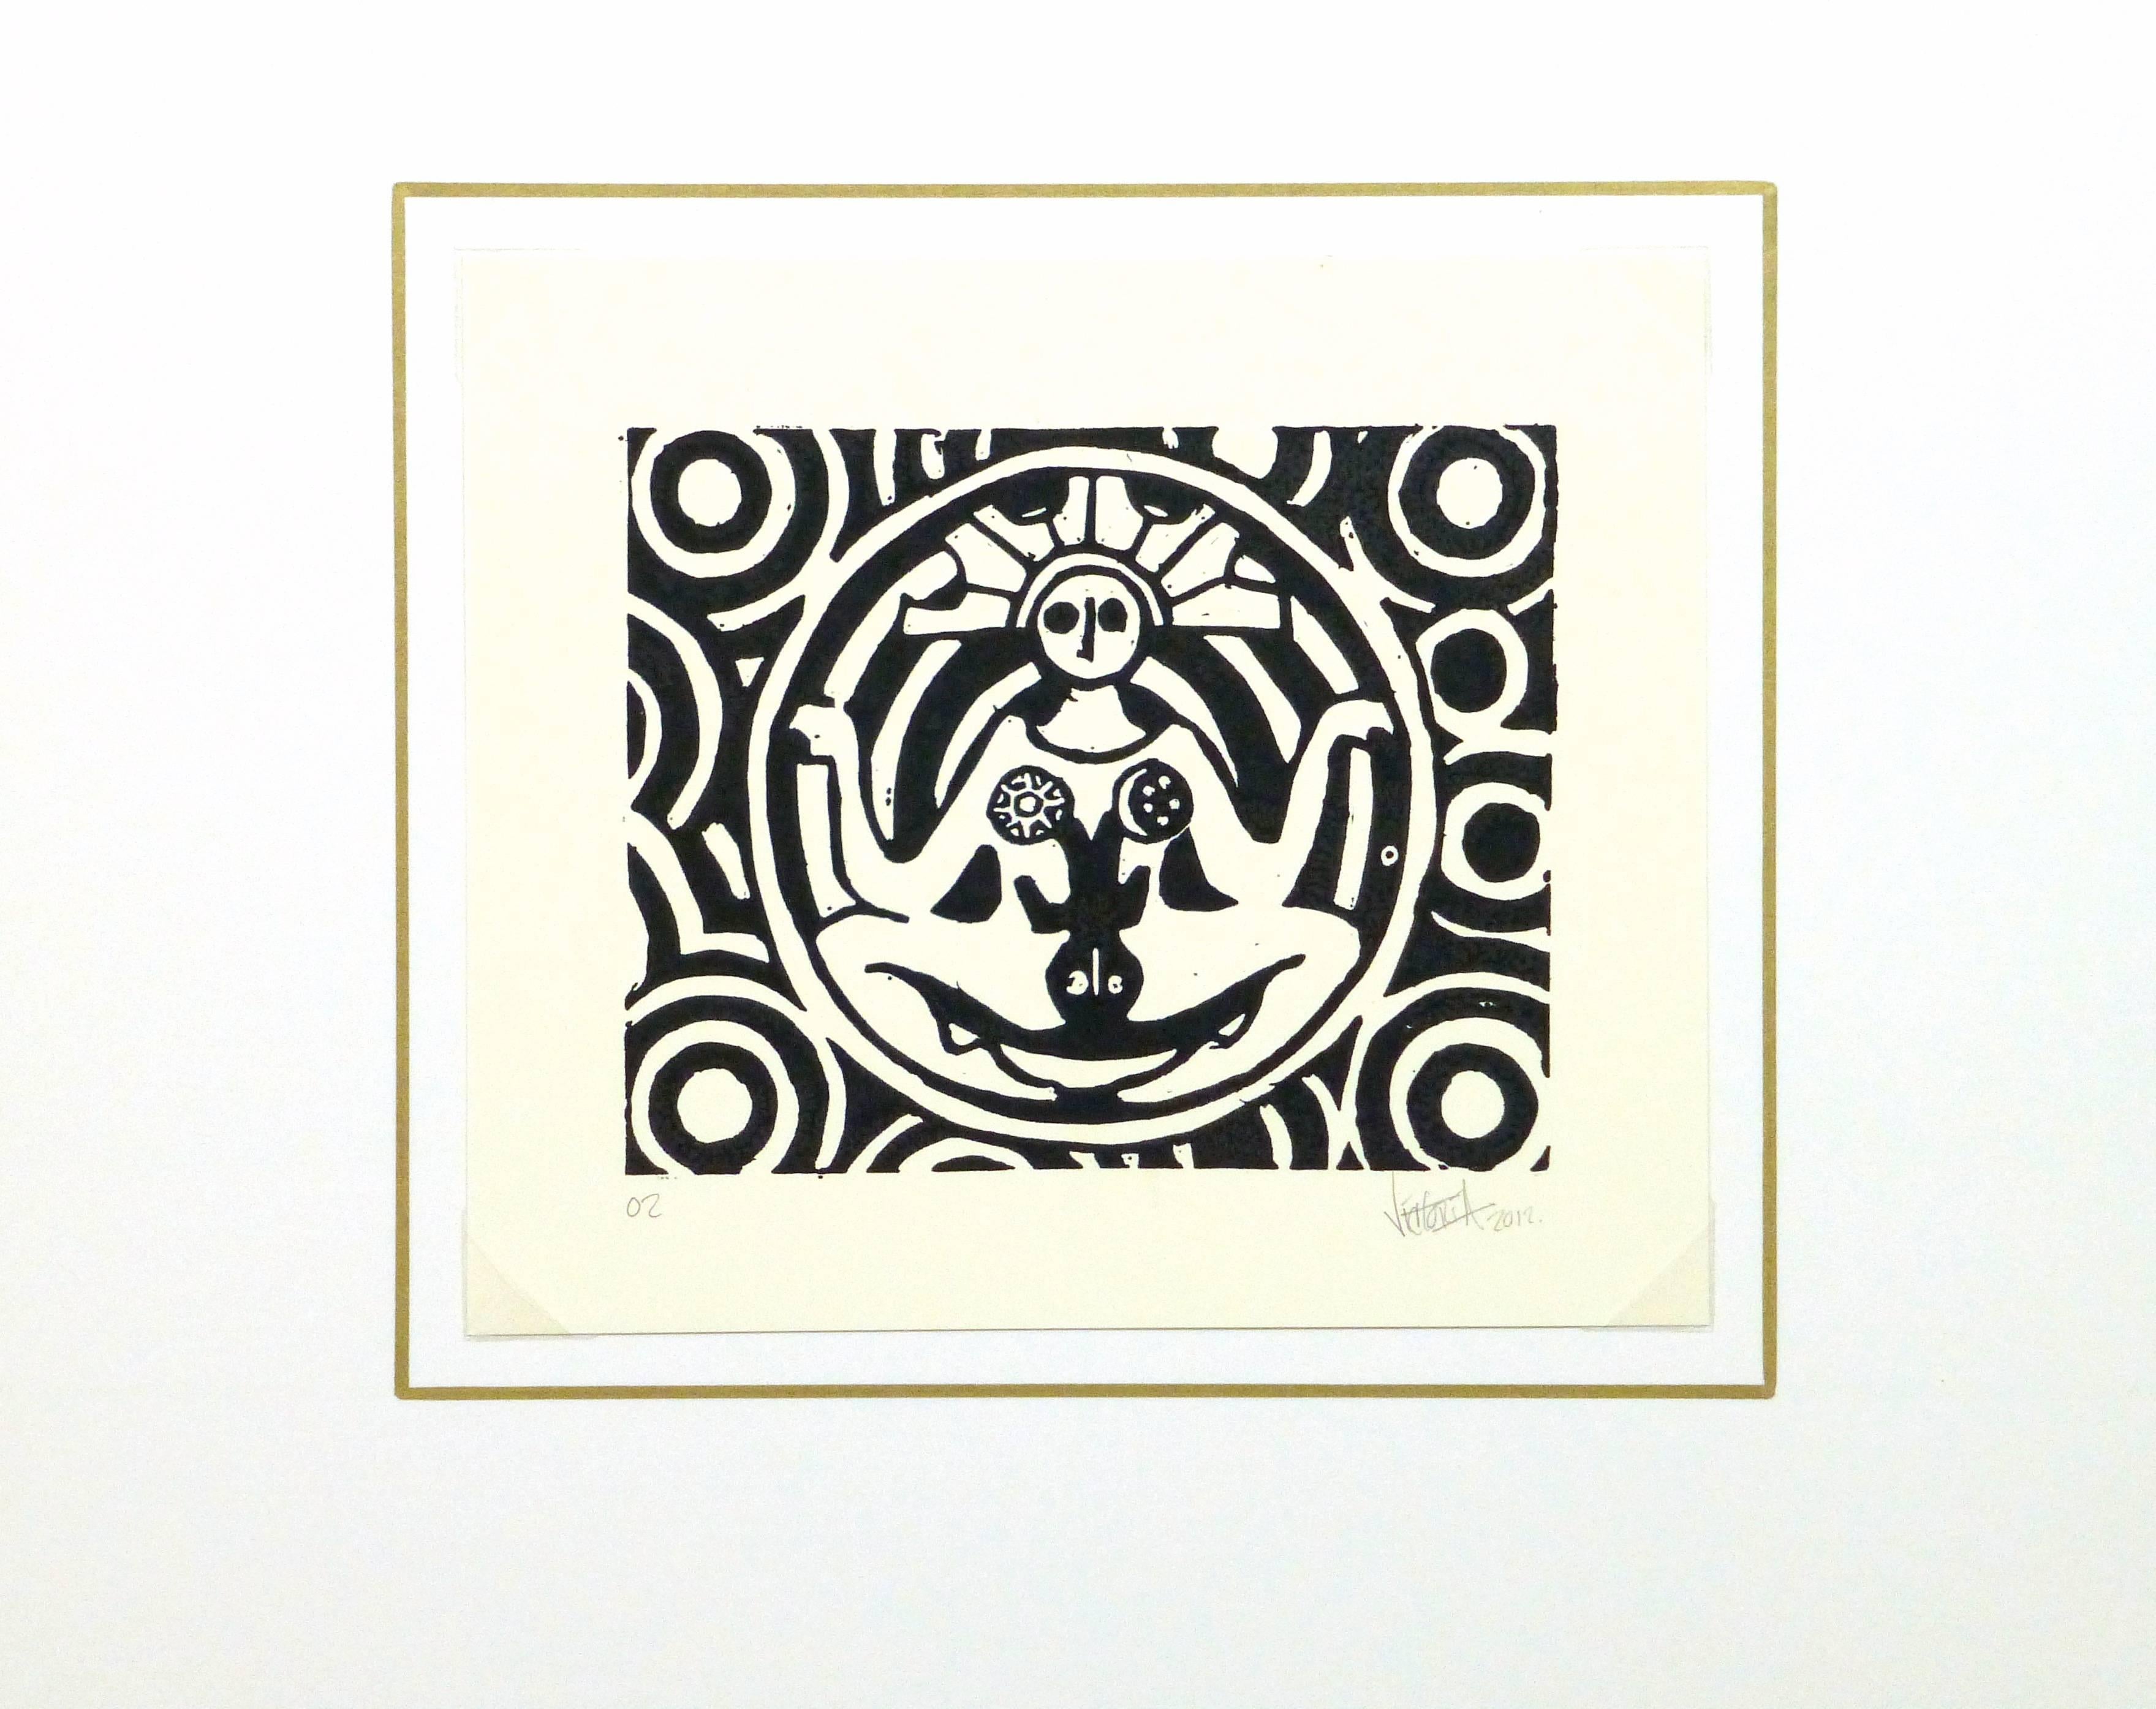 Crisp black and white linocut print of a deity type figure surrounded by circular shapes by Merida Mexico Irvin Victoria, 2012. Signed and dated lower right, numbered 2 lower left. 

Original artwork on paper displayed on a white mat with a gold